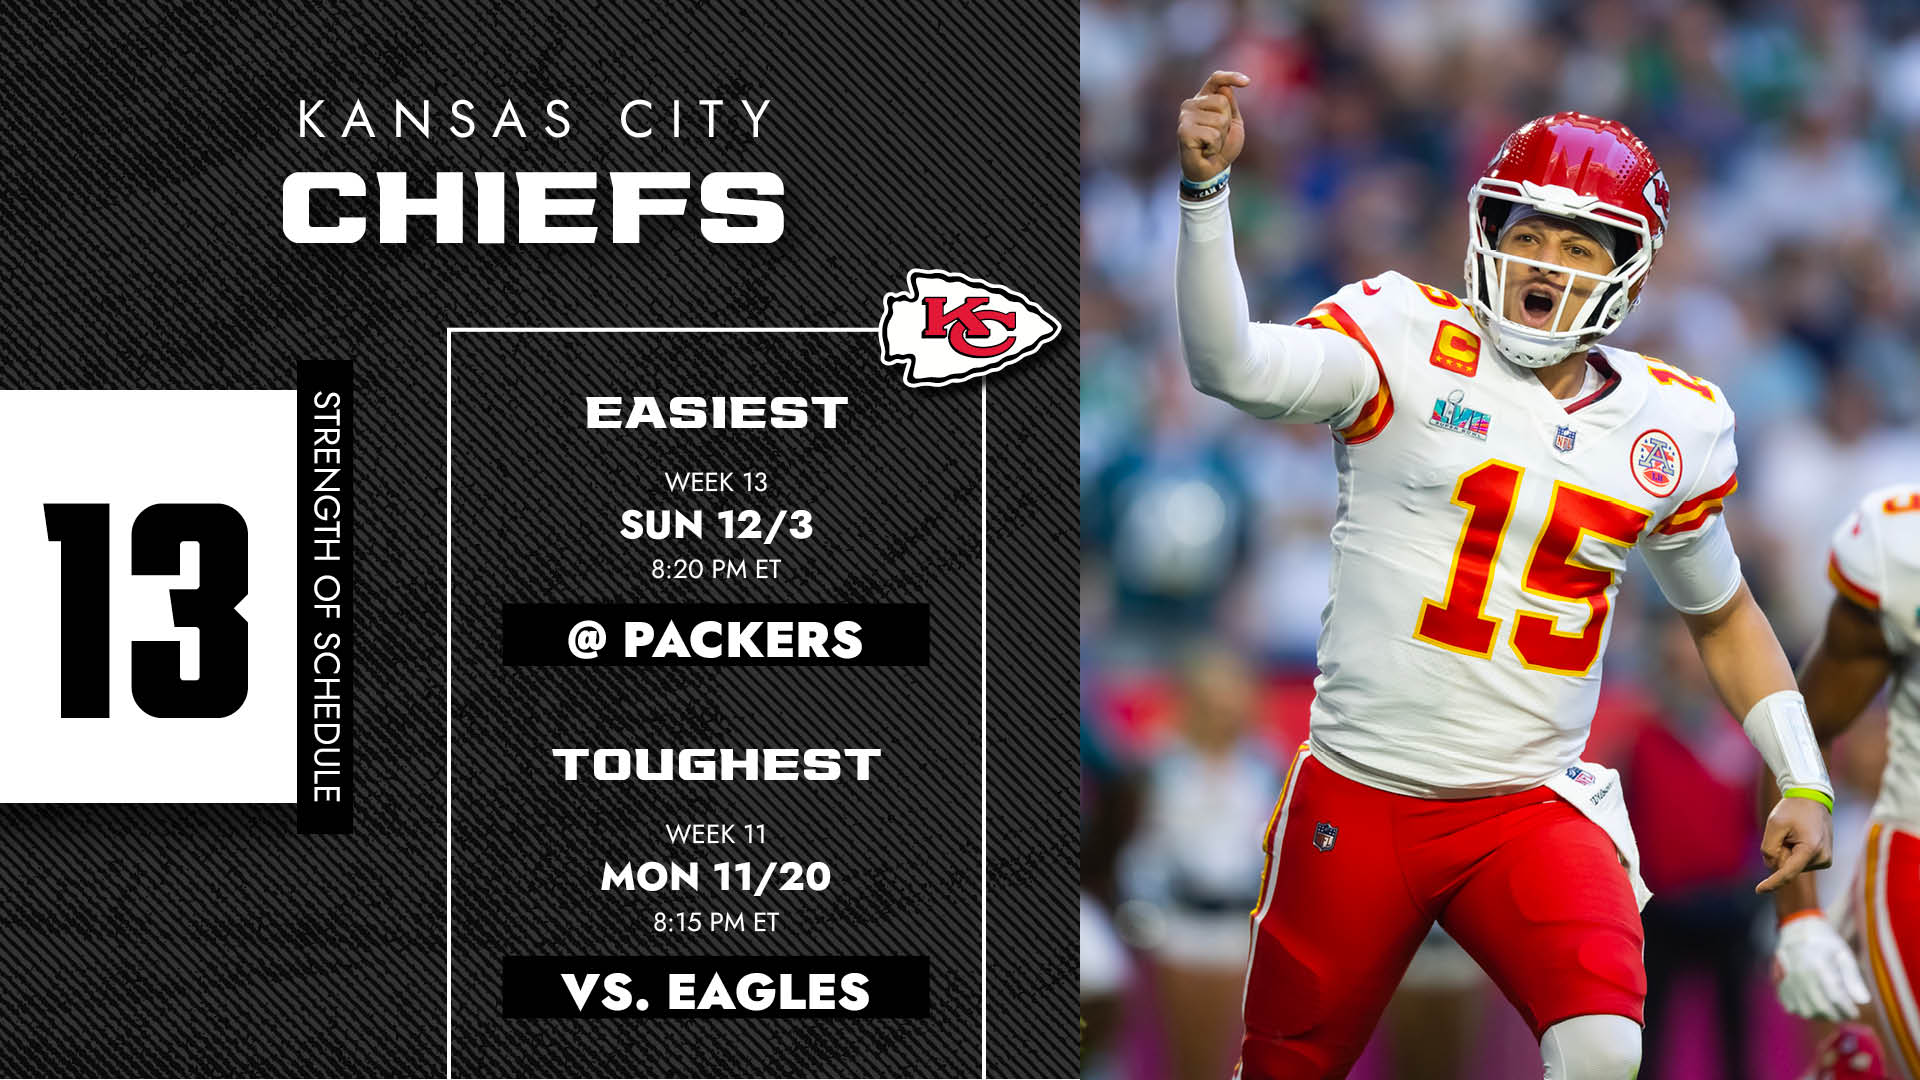 is kc chiefs game televised today